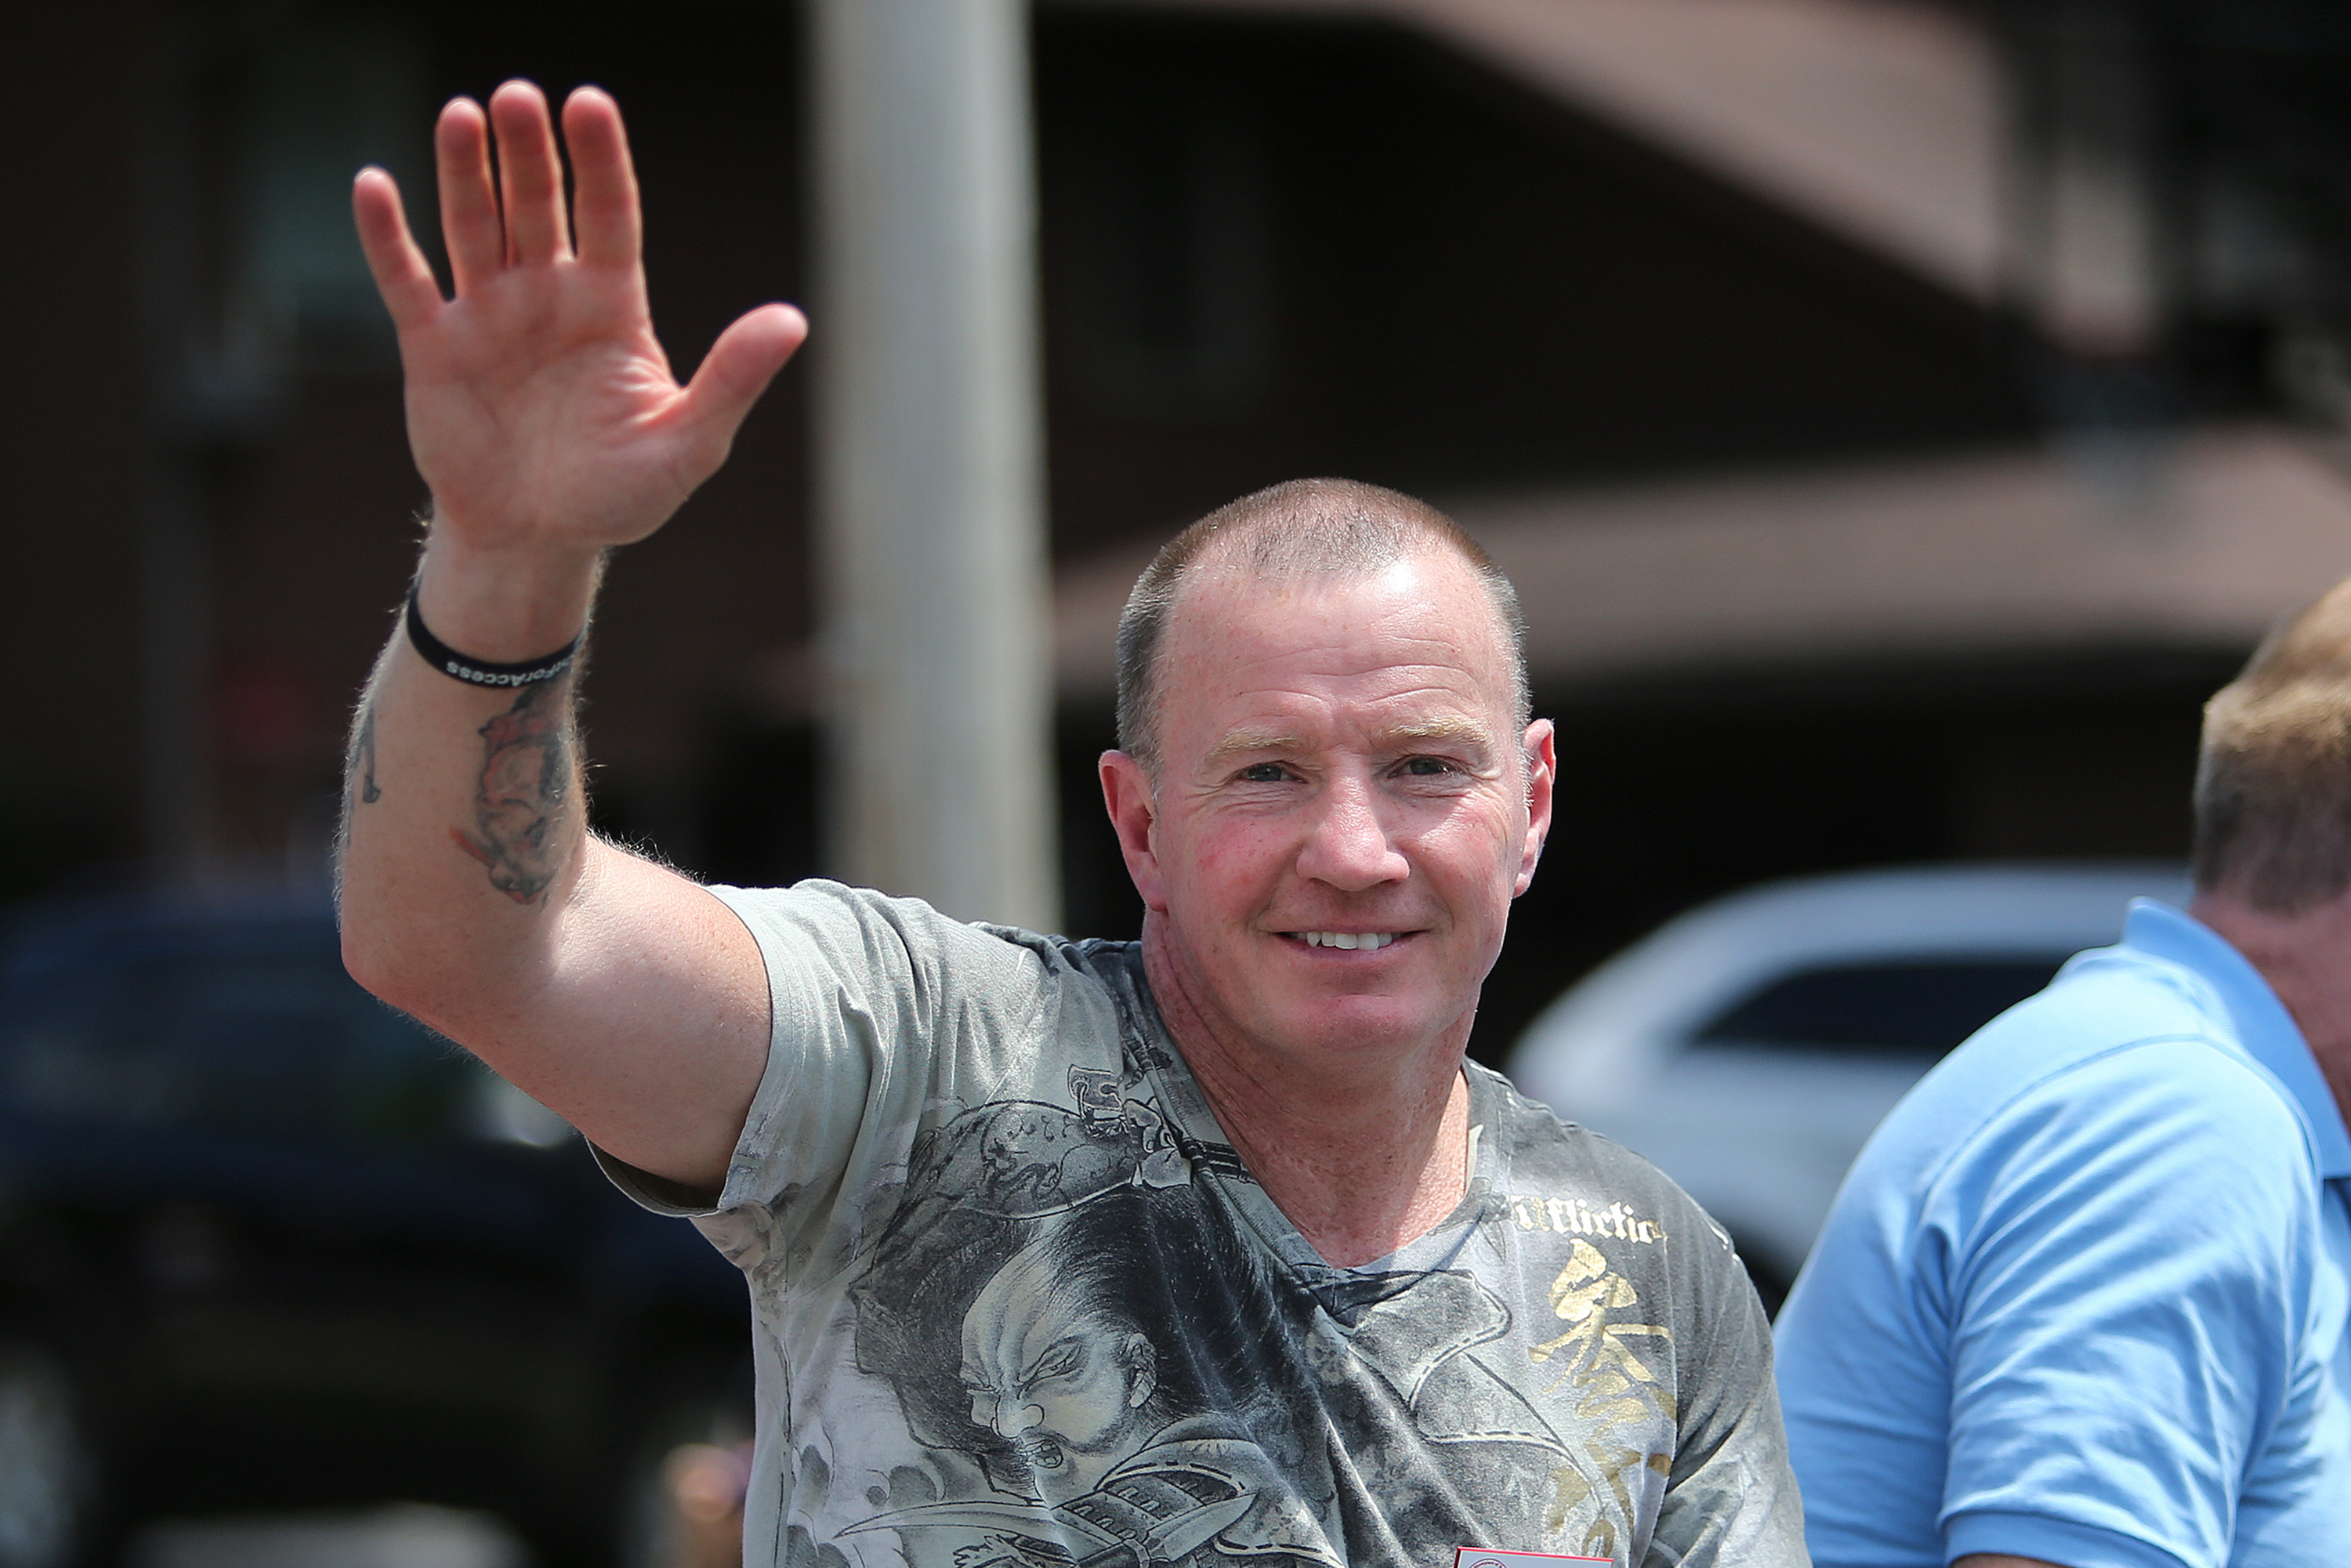 Micky Ward is pictured as he waves to fans during the parade at the International Boxing Hall of Fame induction Weekend of Champions events on June 14, 2015, in Canastota, New York | Source: Getty Images